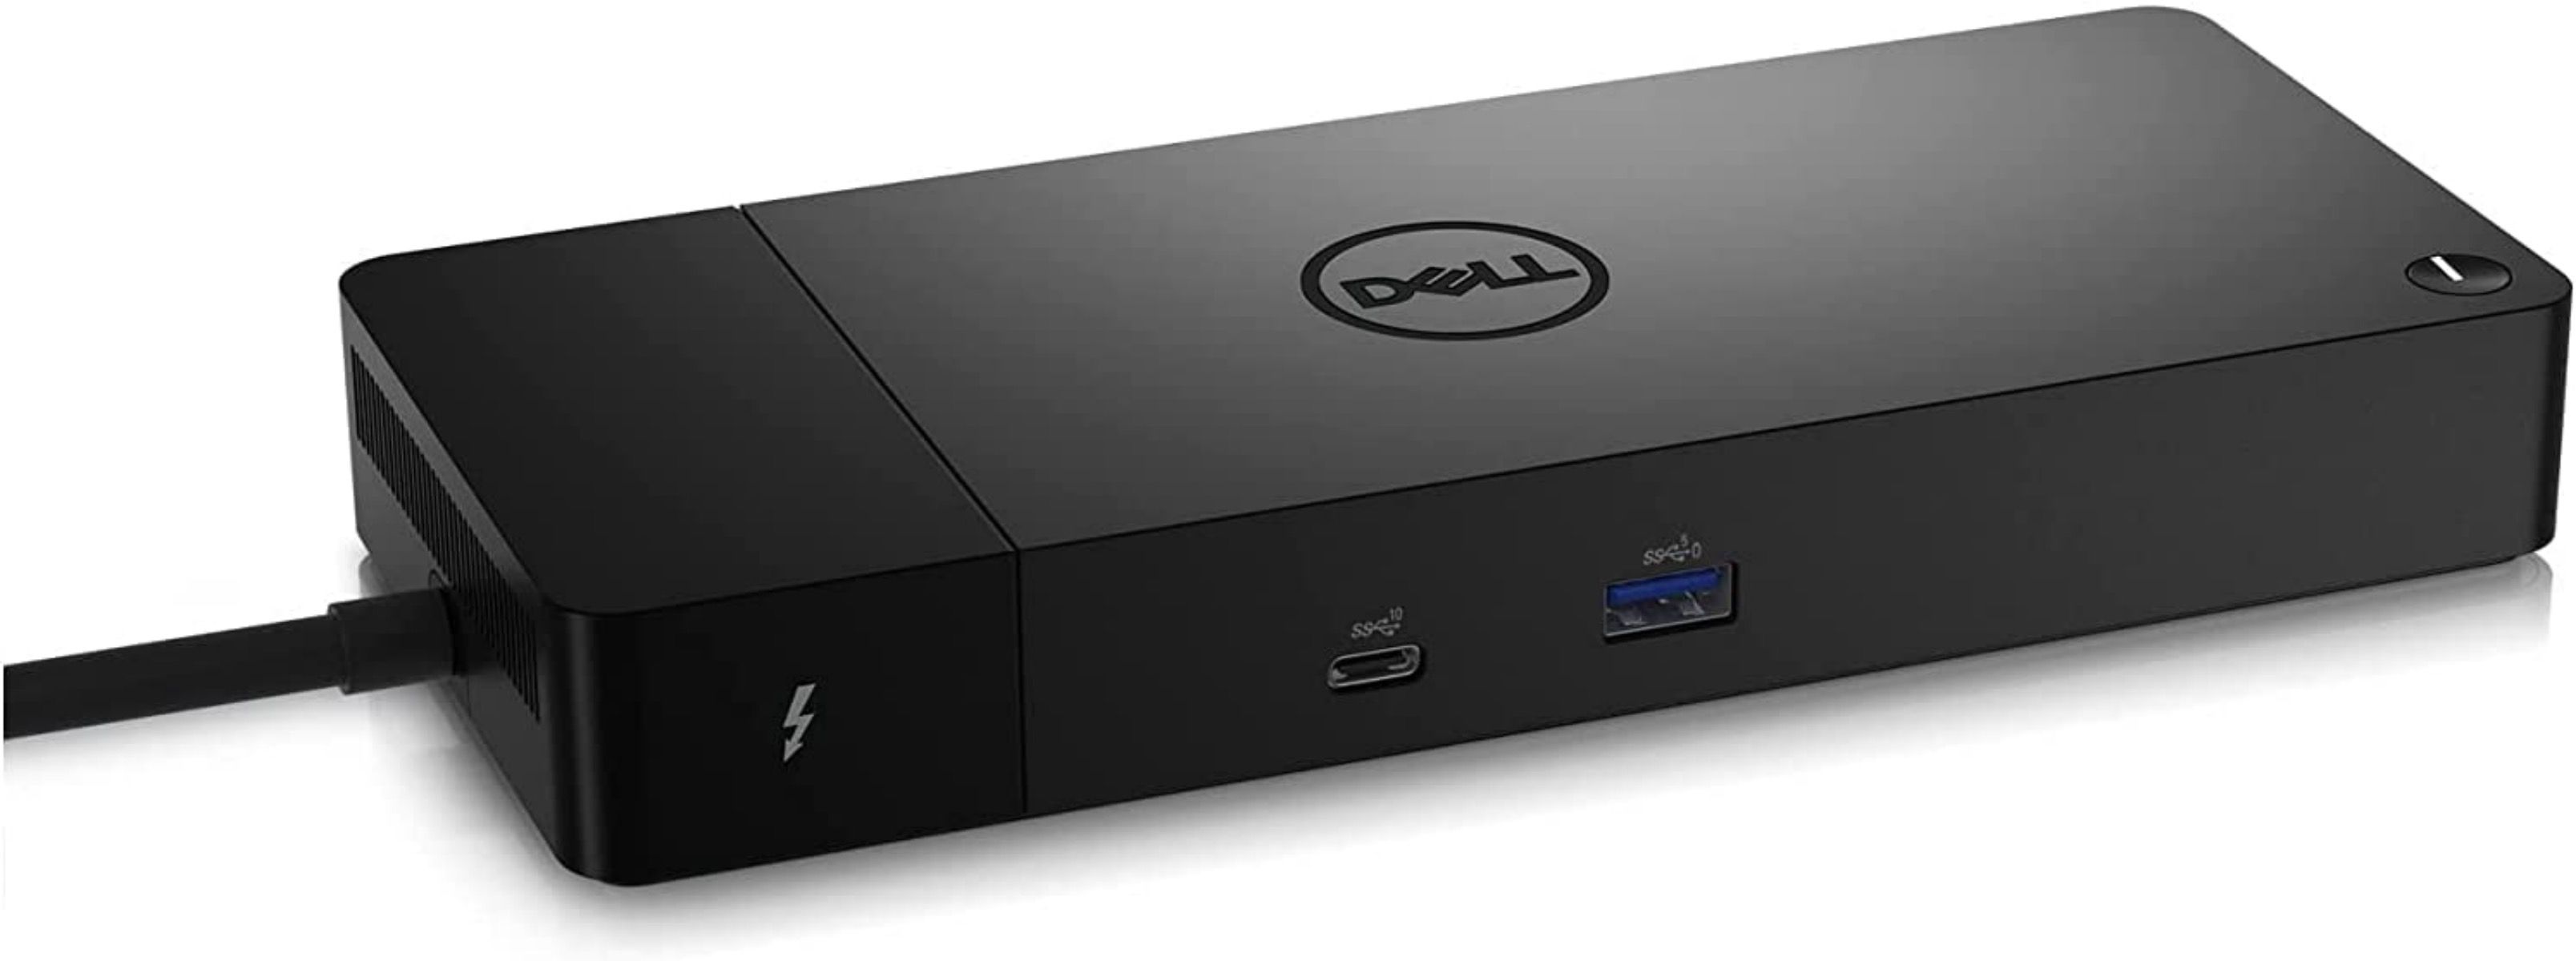 Front image of black Dell Thunderbolt 4 docking station with charging cable plugged in